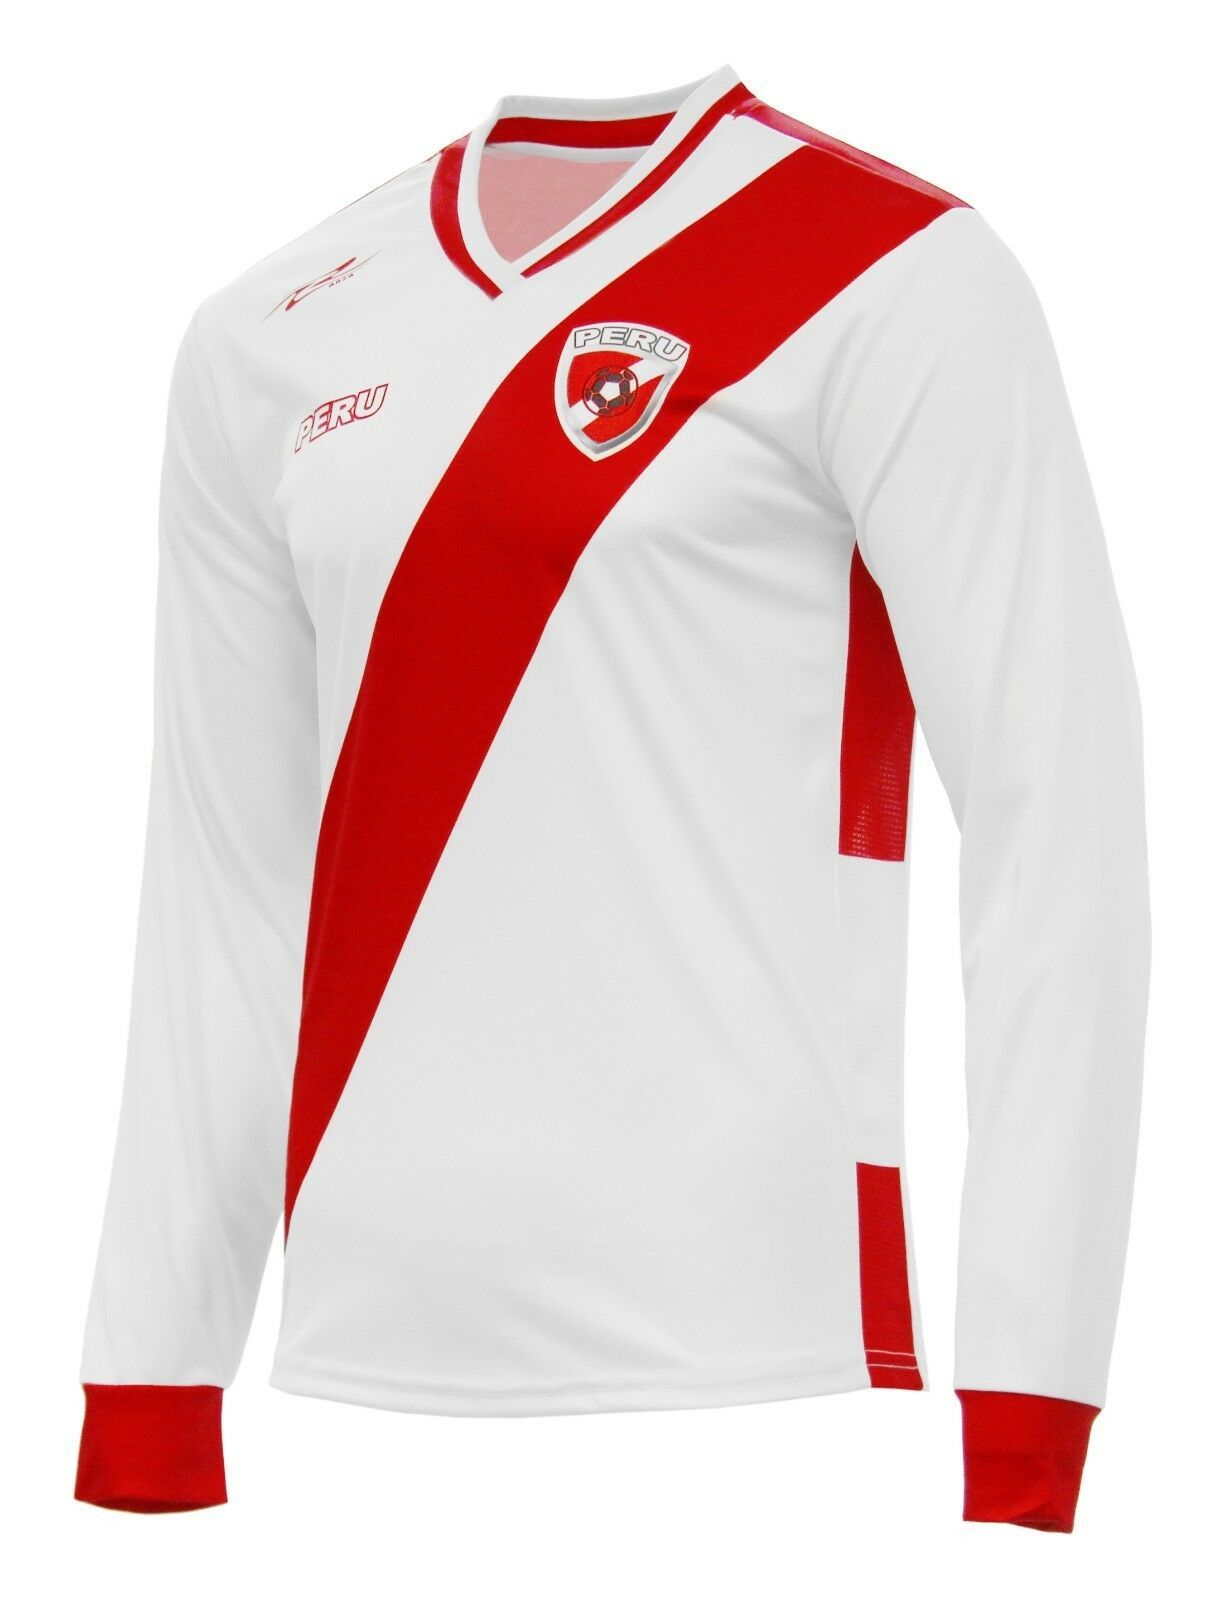 PERU Jersey New Arza Soccer White Long Sleeve For Men 100 Polyester Men